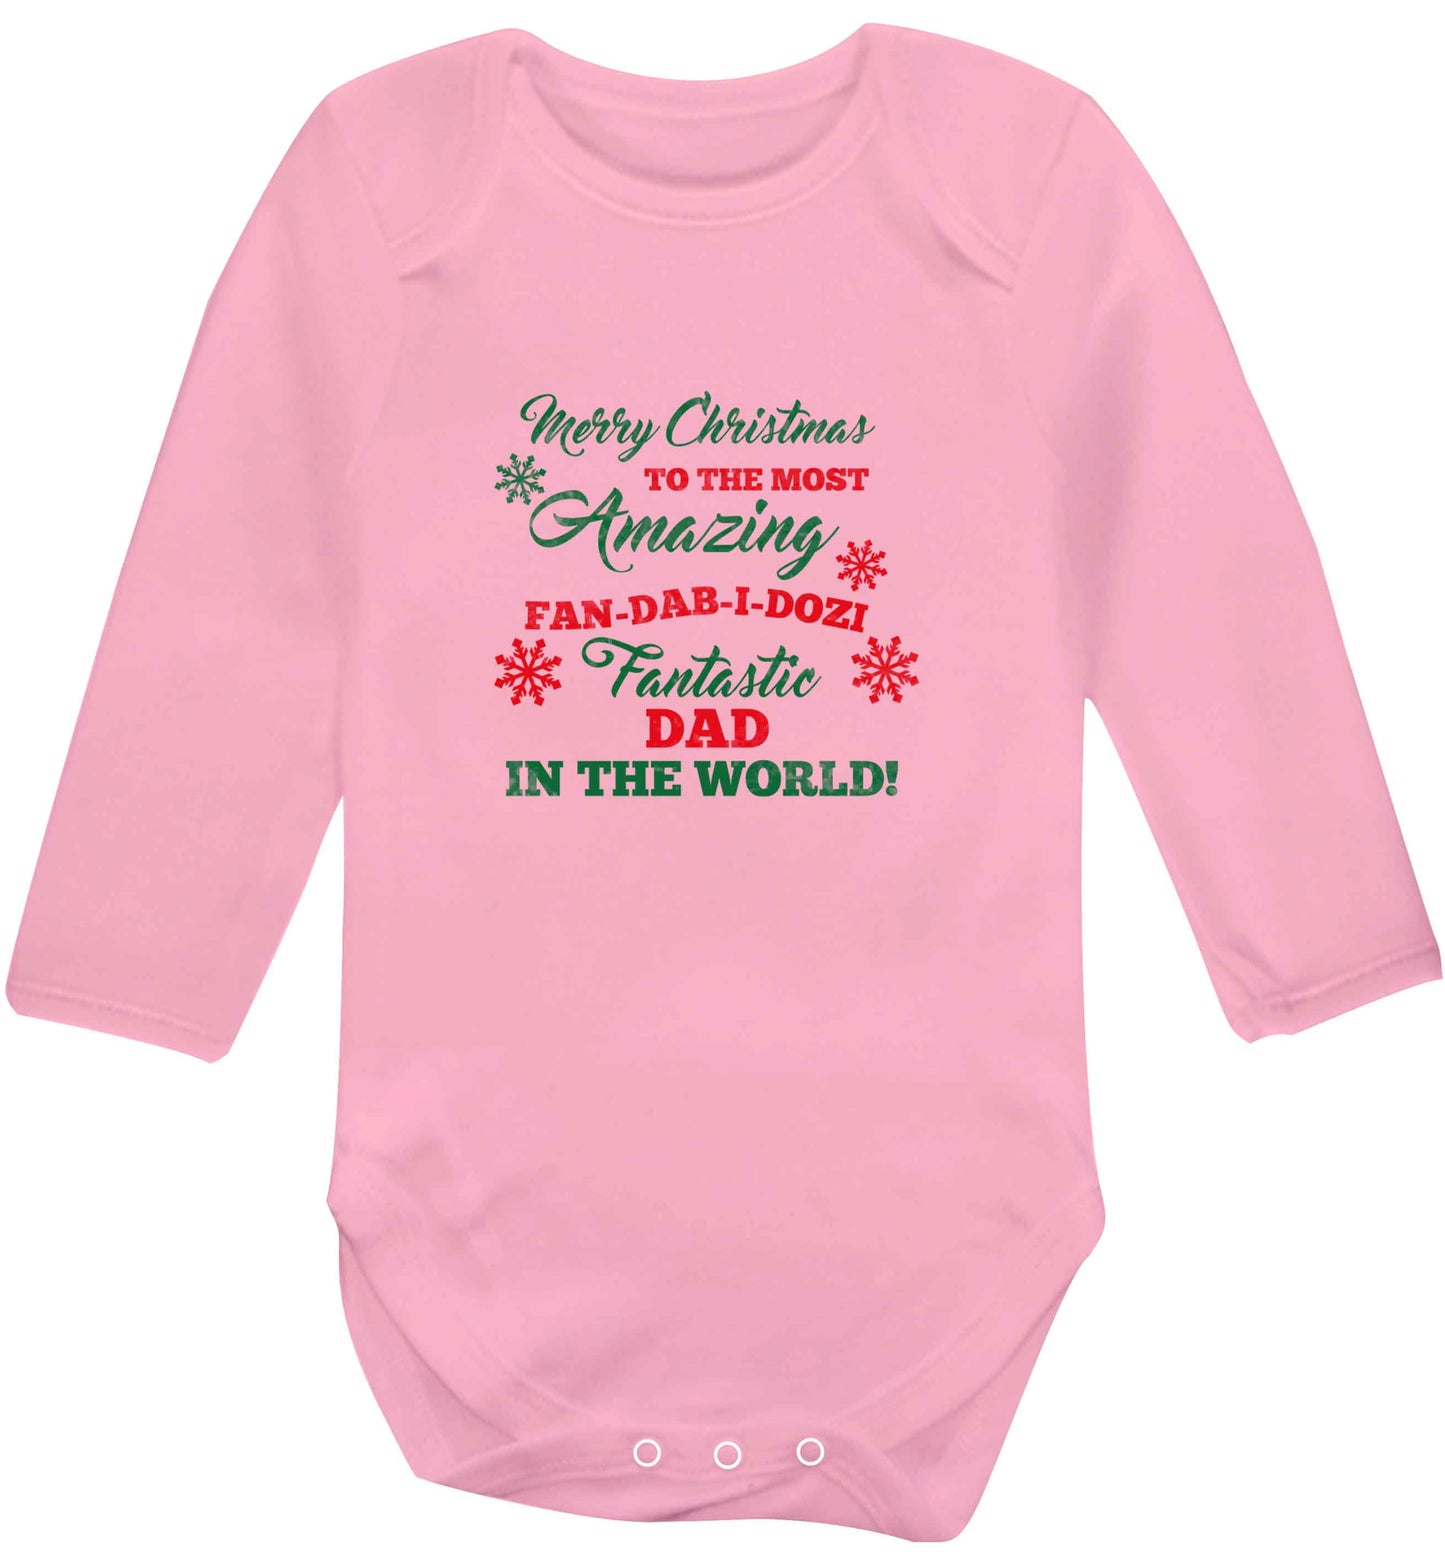 Merry Christmas to the most amazing fan-dab-i-dozi fantasic Dad in the world baby vest long sleeved pale pink 6-12 months